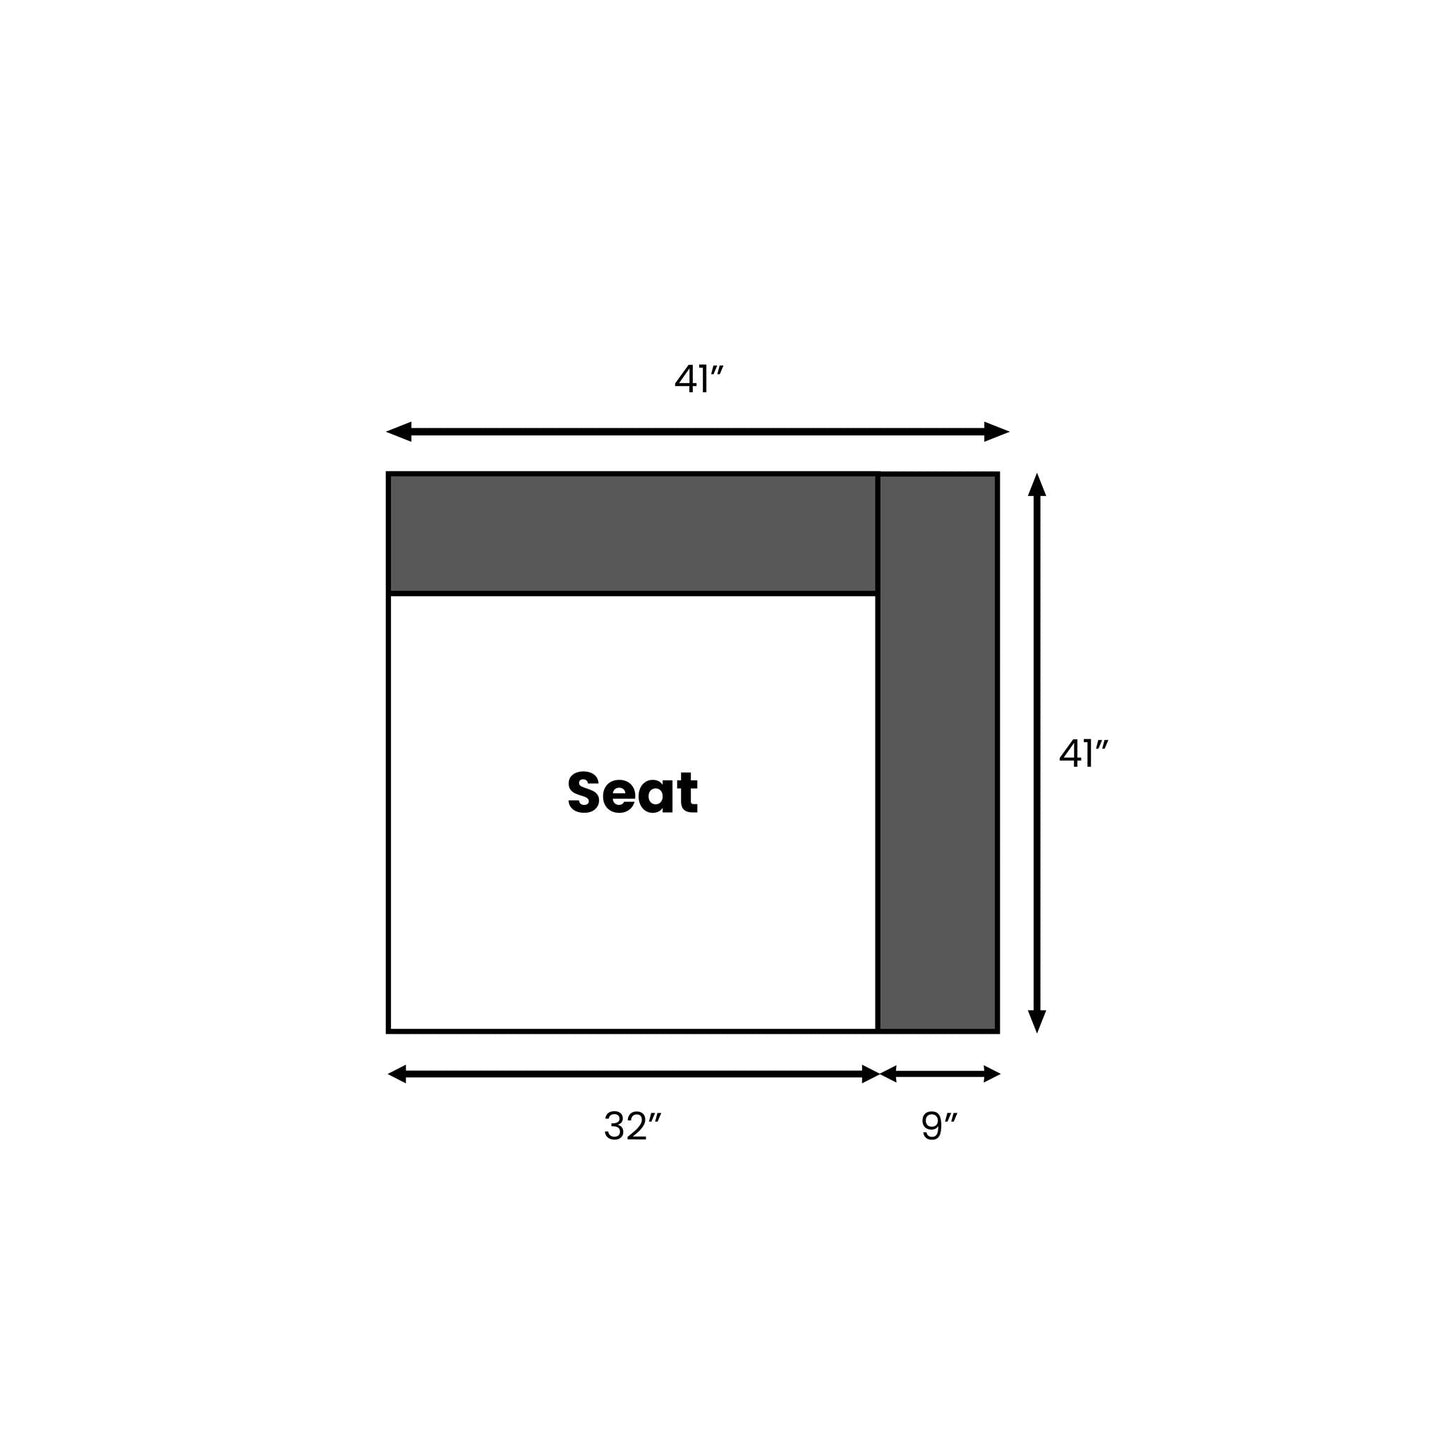 Dimensions of the Rezy Sofa Corner Seat add-on